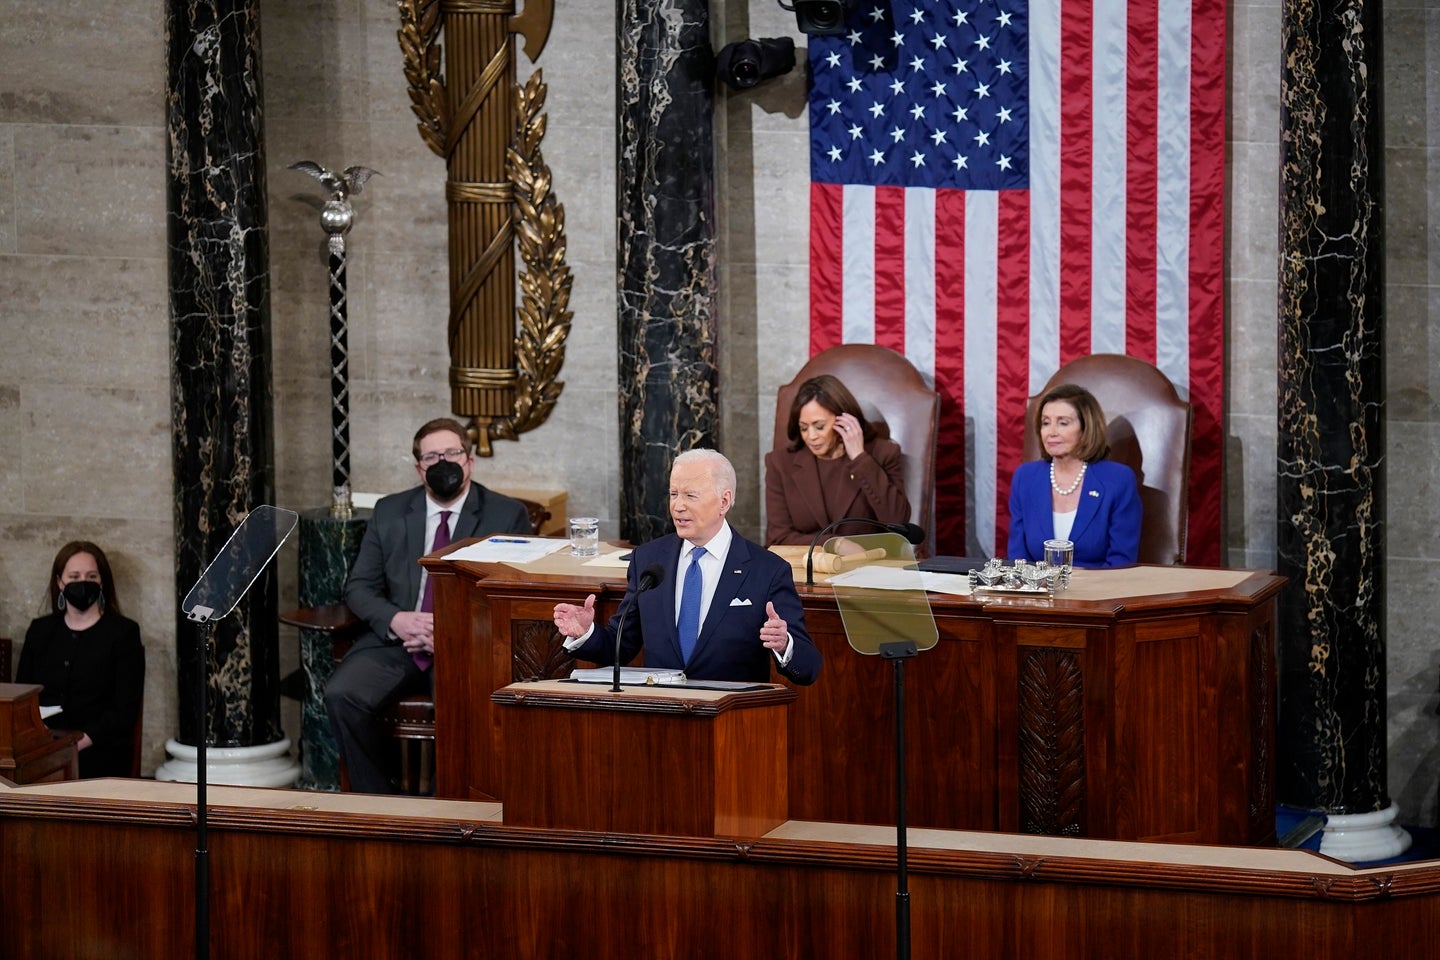 Biden State of the Union 2022 with the US president, vice president, and speaker of the House of Representatives in front of an American flag and two other individuals wearing COVID masks in the Capitol